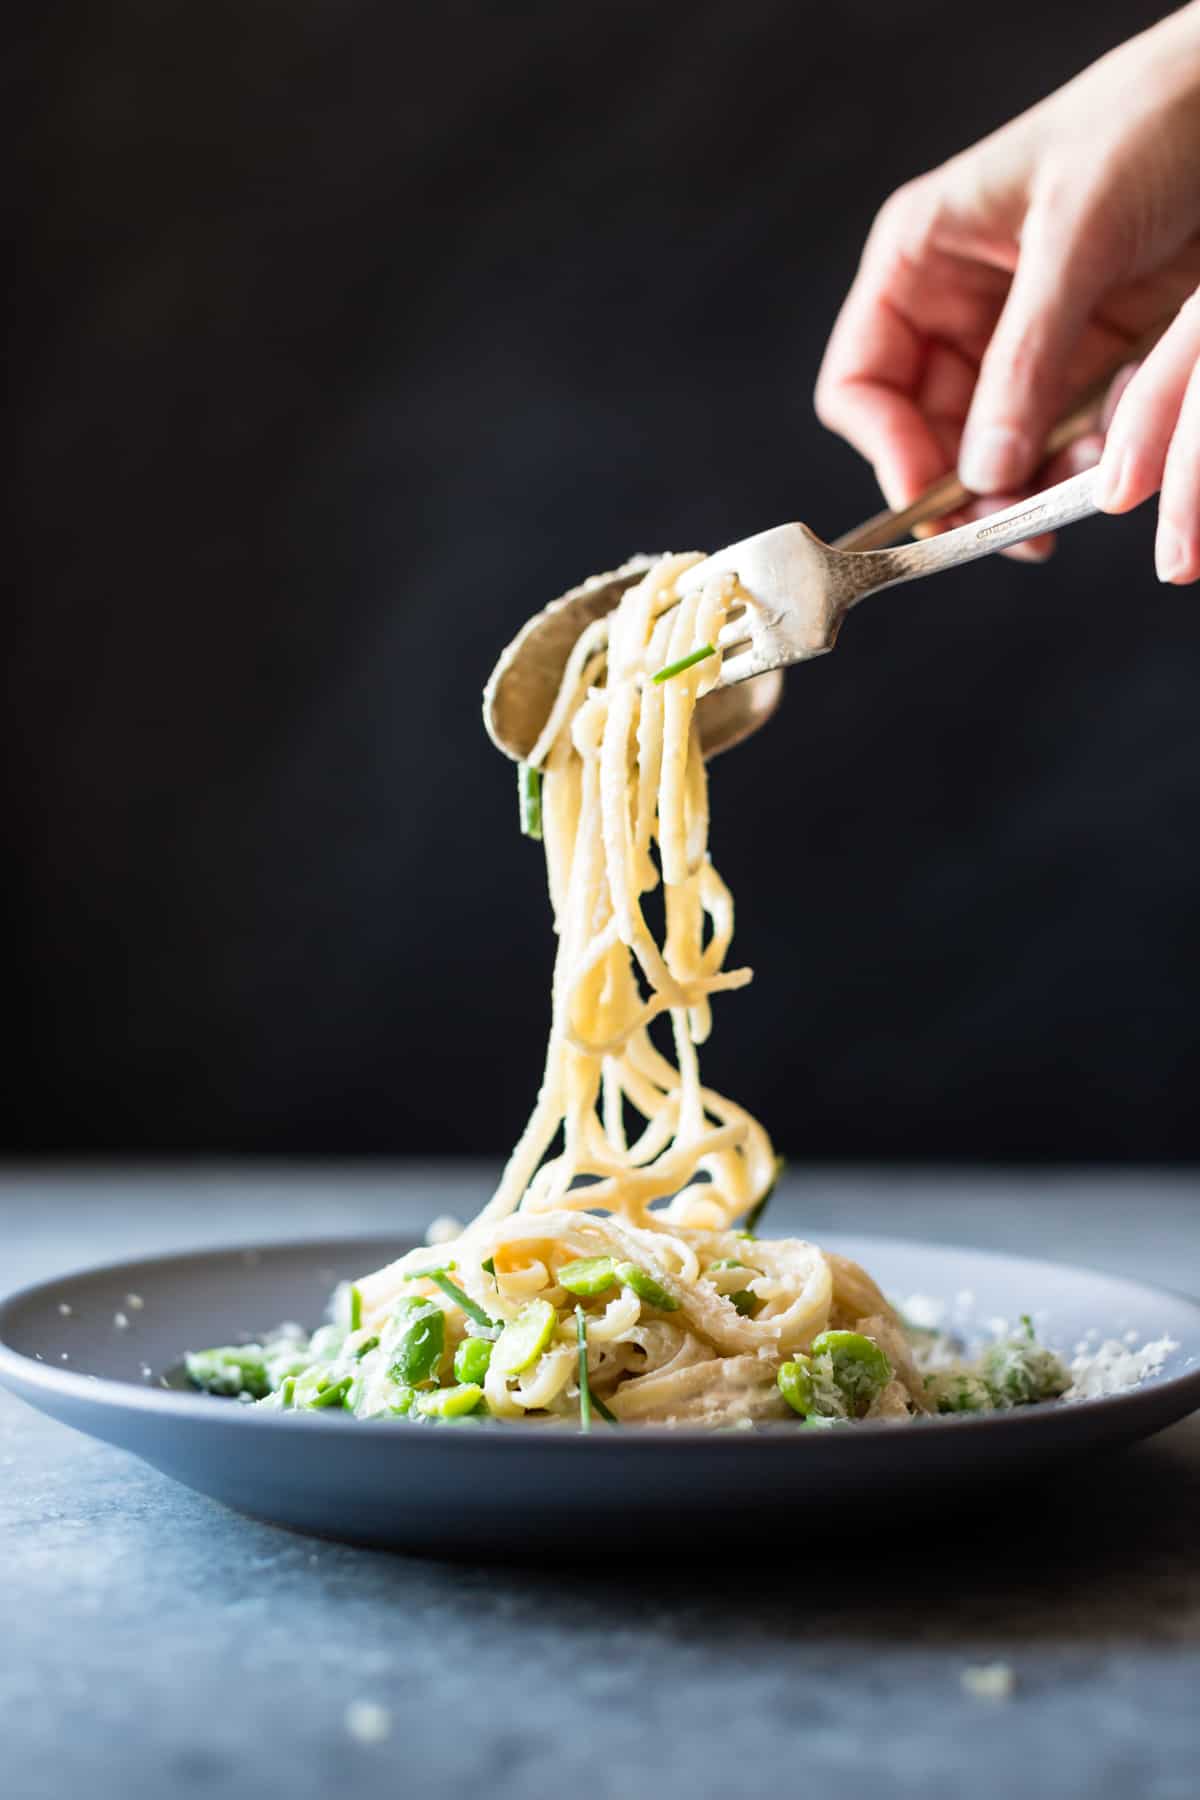 forkful of Creamy Cashew-Miso Pasta with Peas and Fava Beans {gluten-free, vegan option}